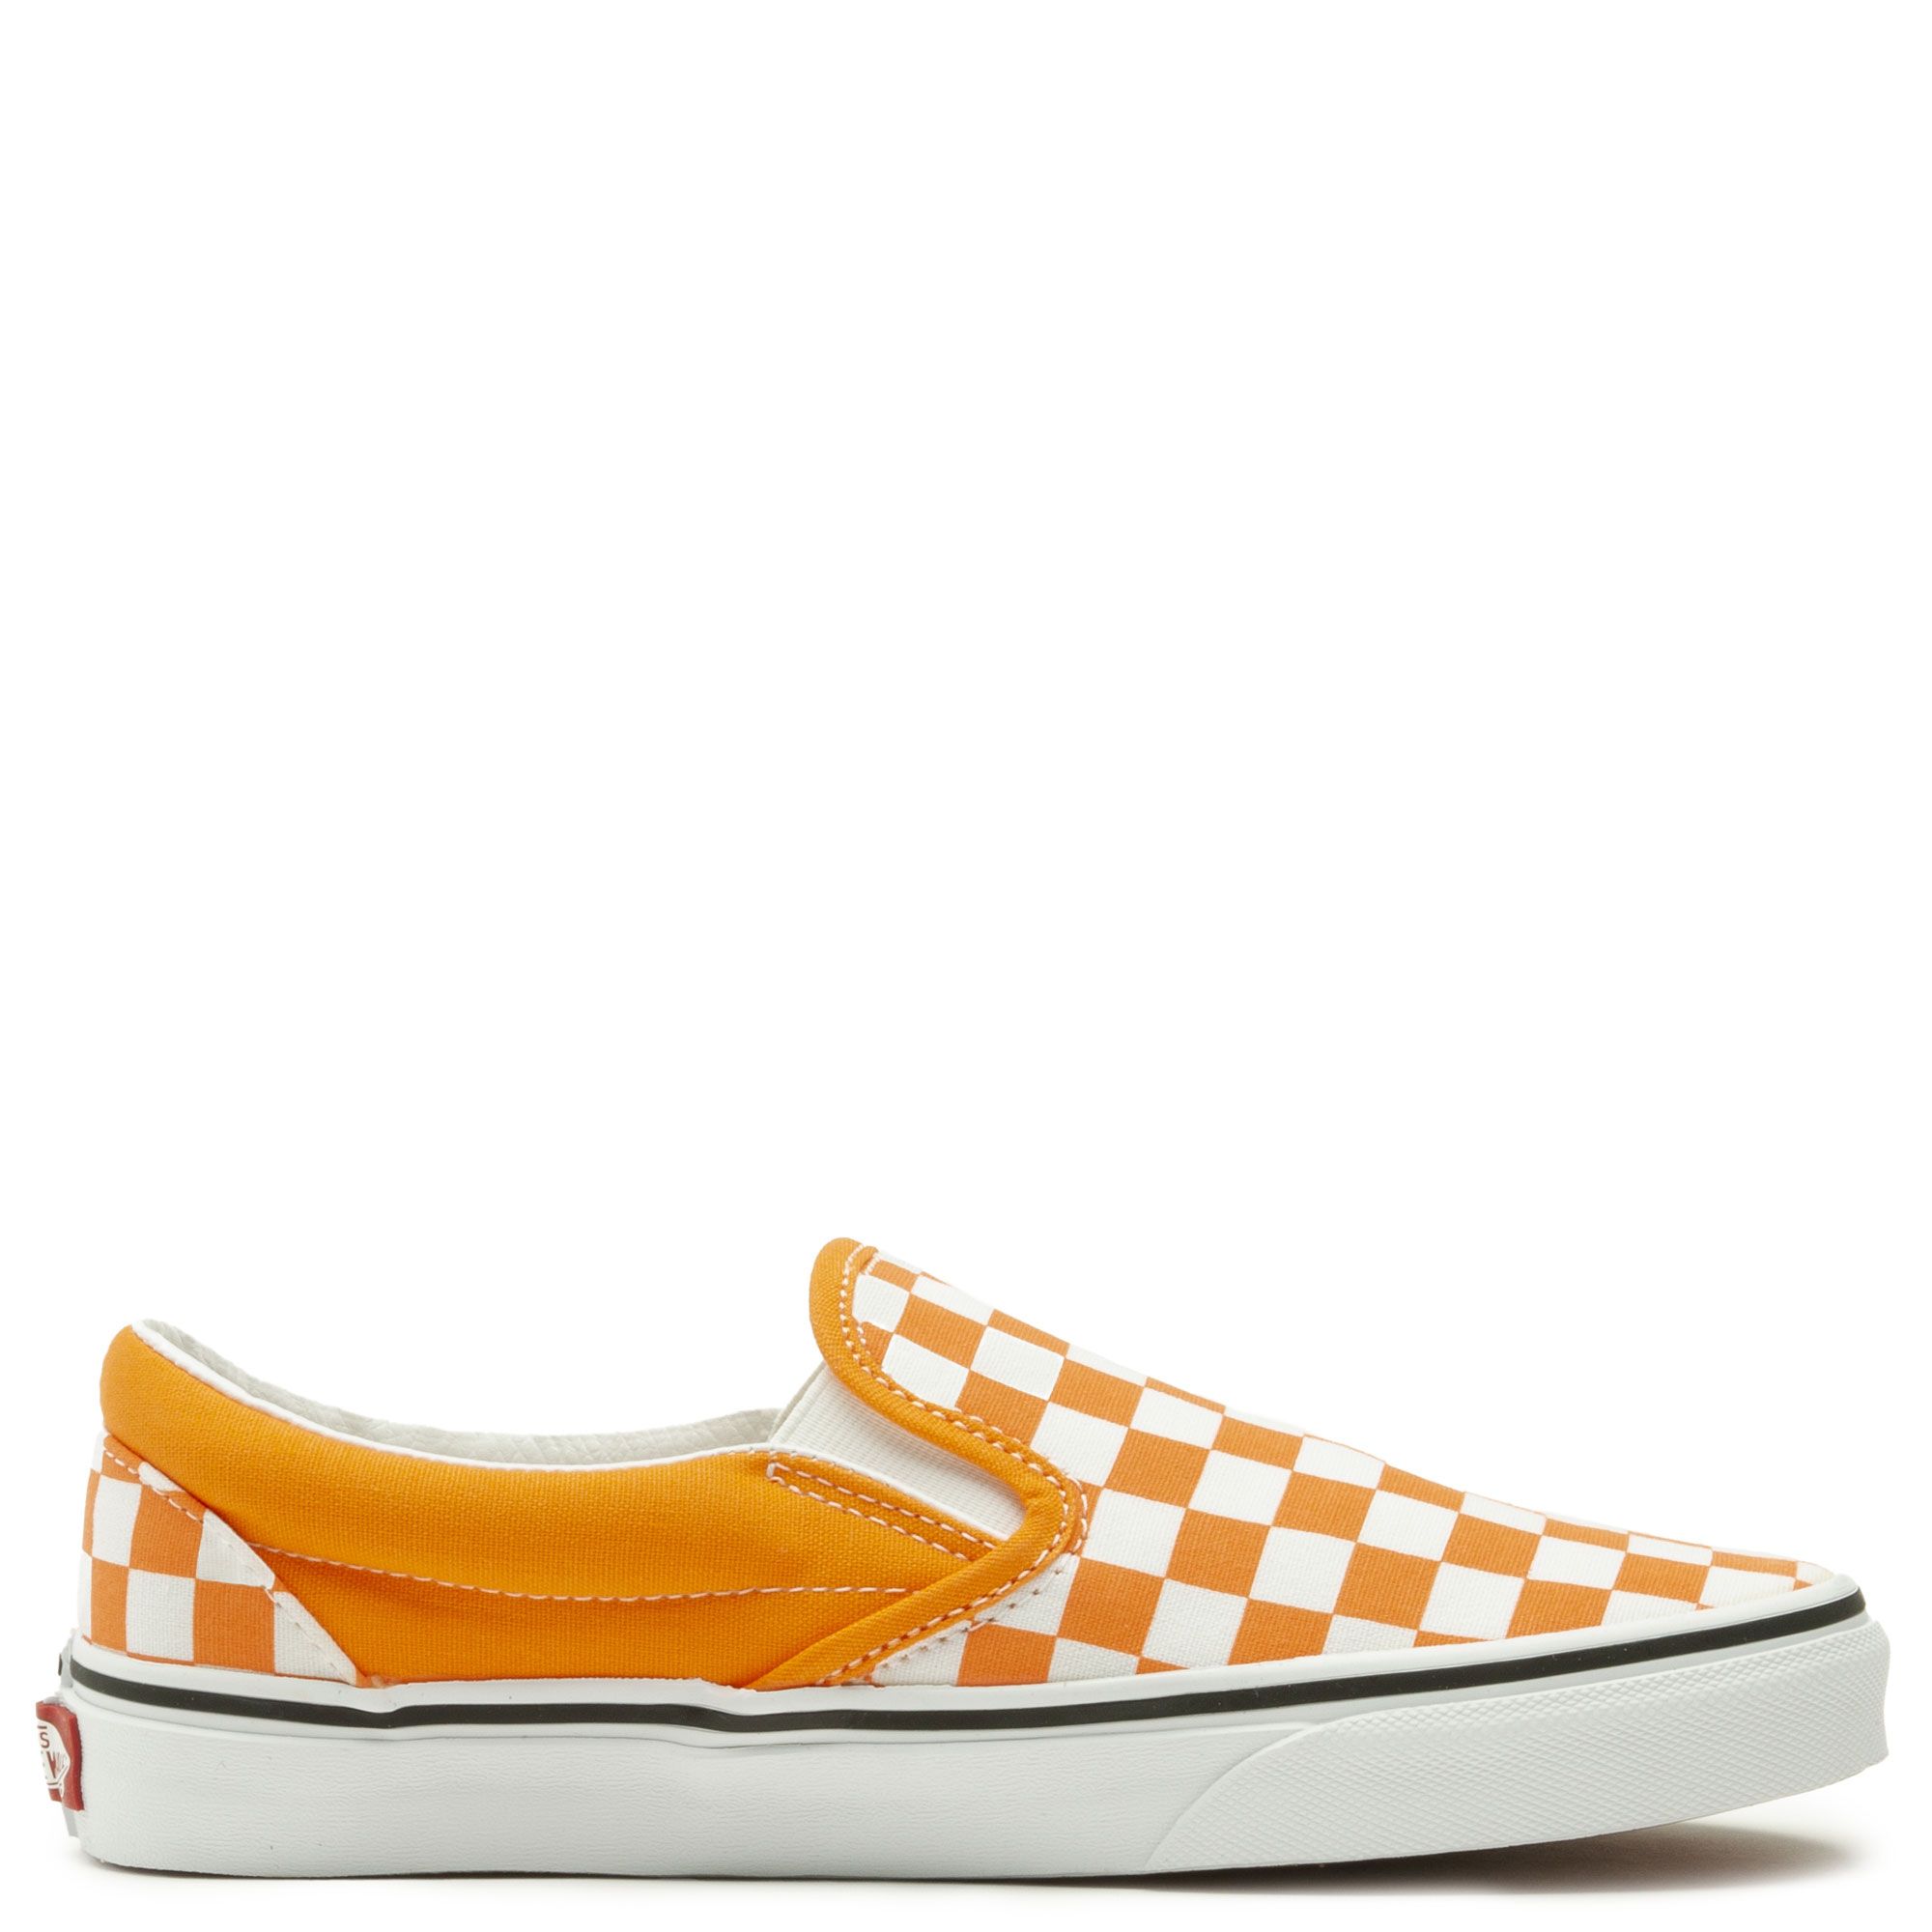 Vans, Shoes, Yellow And White Checkered Slipon Vans Size 8